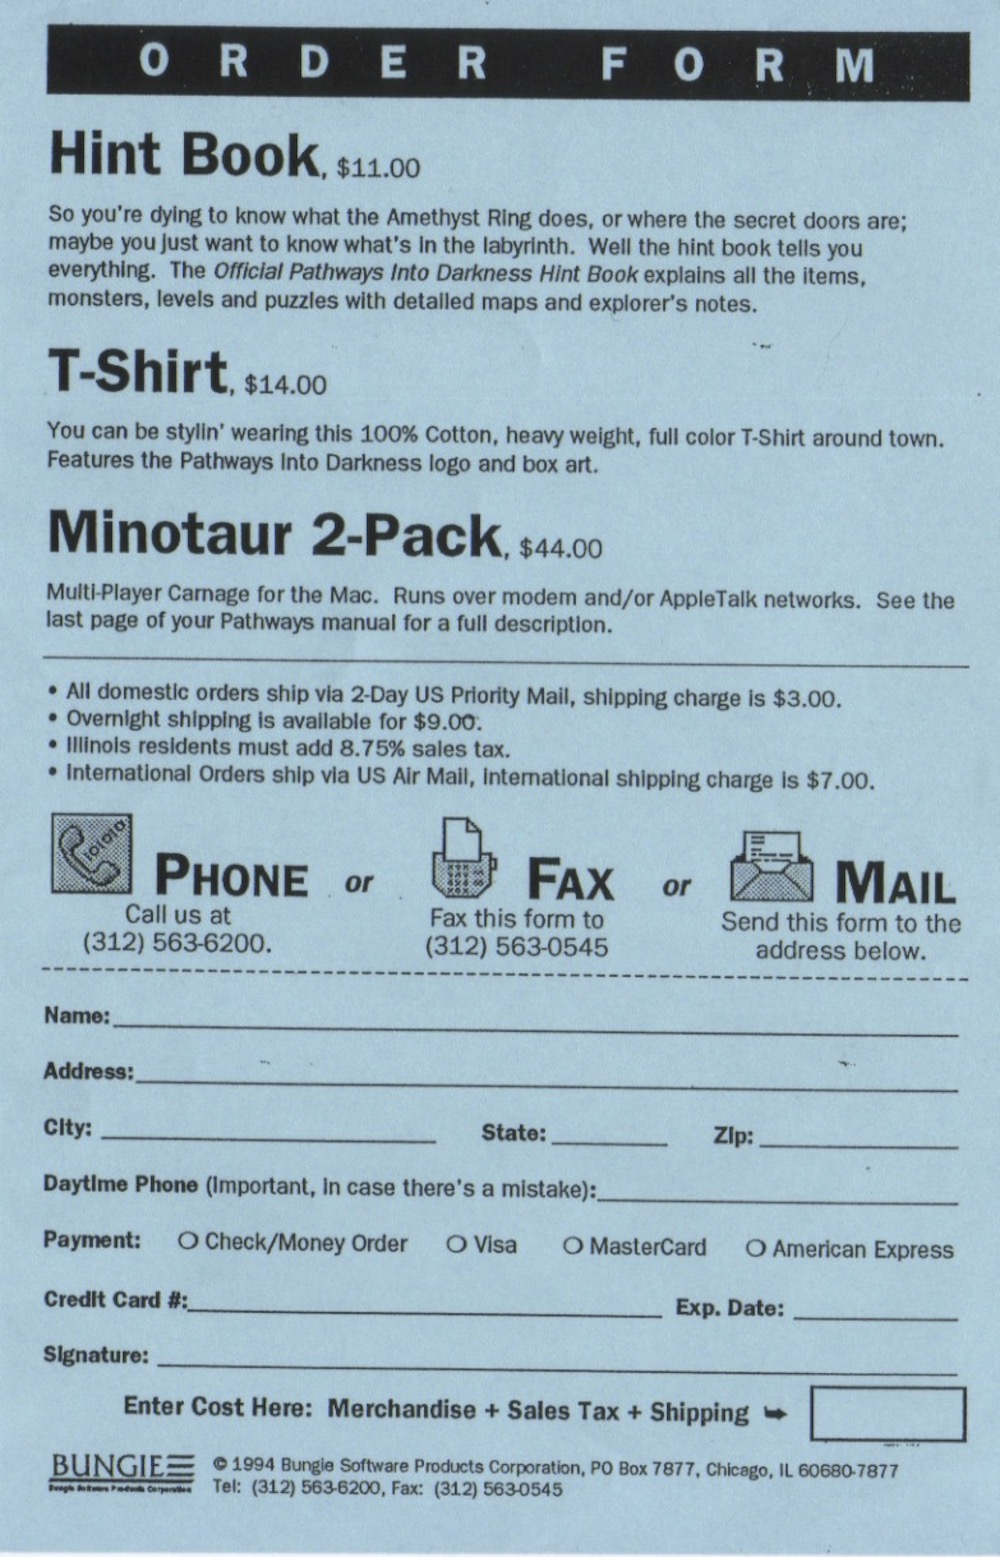 Bungie Order Form from early 1994